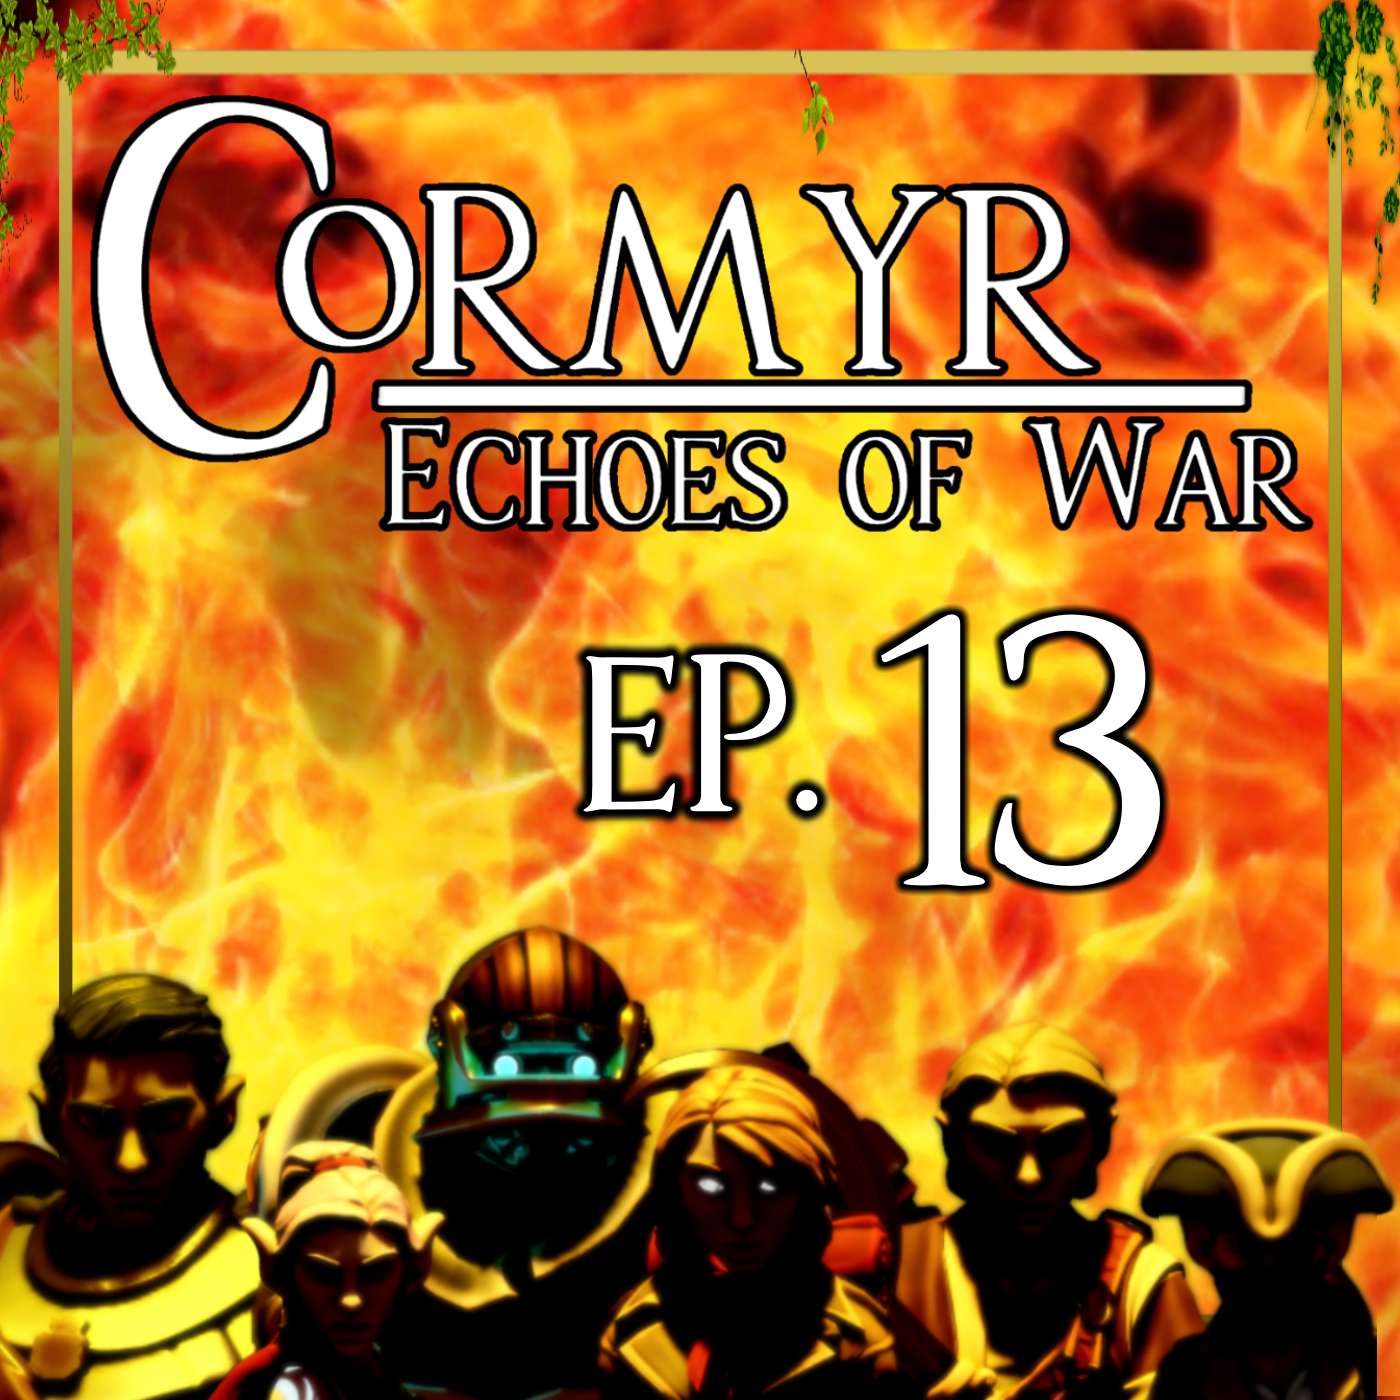 Cormyr: Echoes of War - Ep. 13 - The Battle for Fort Lymera